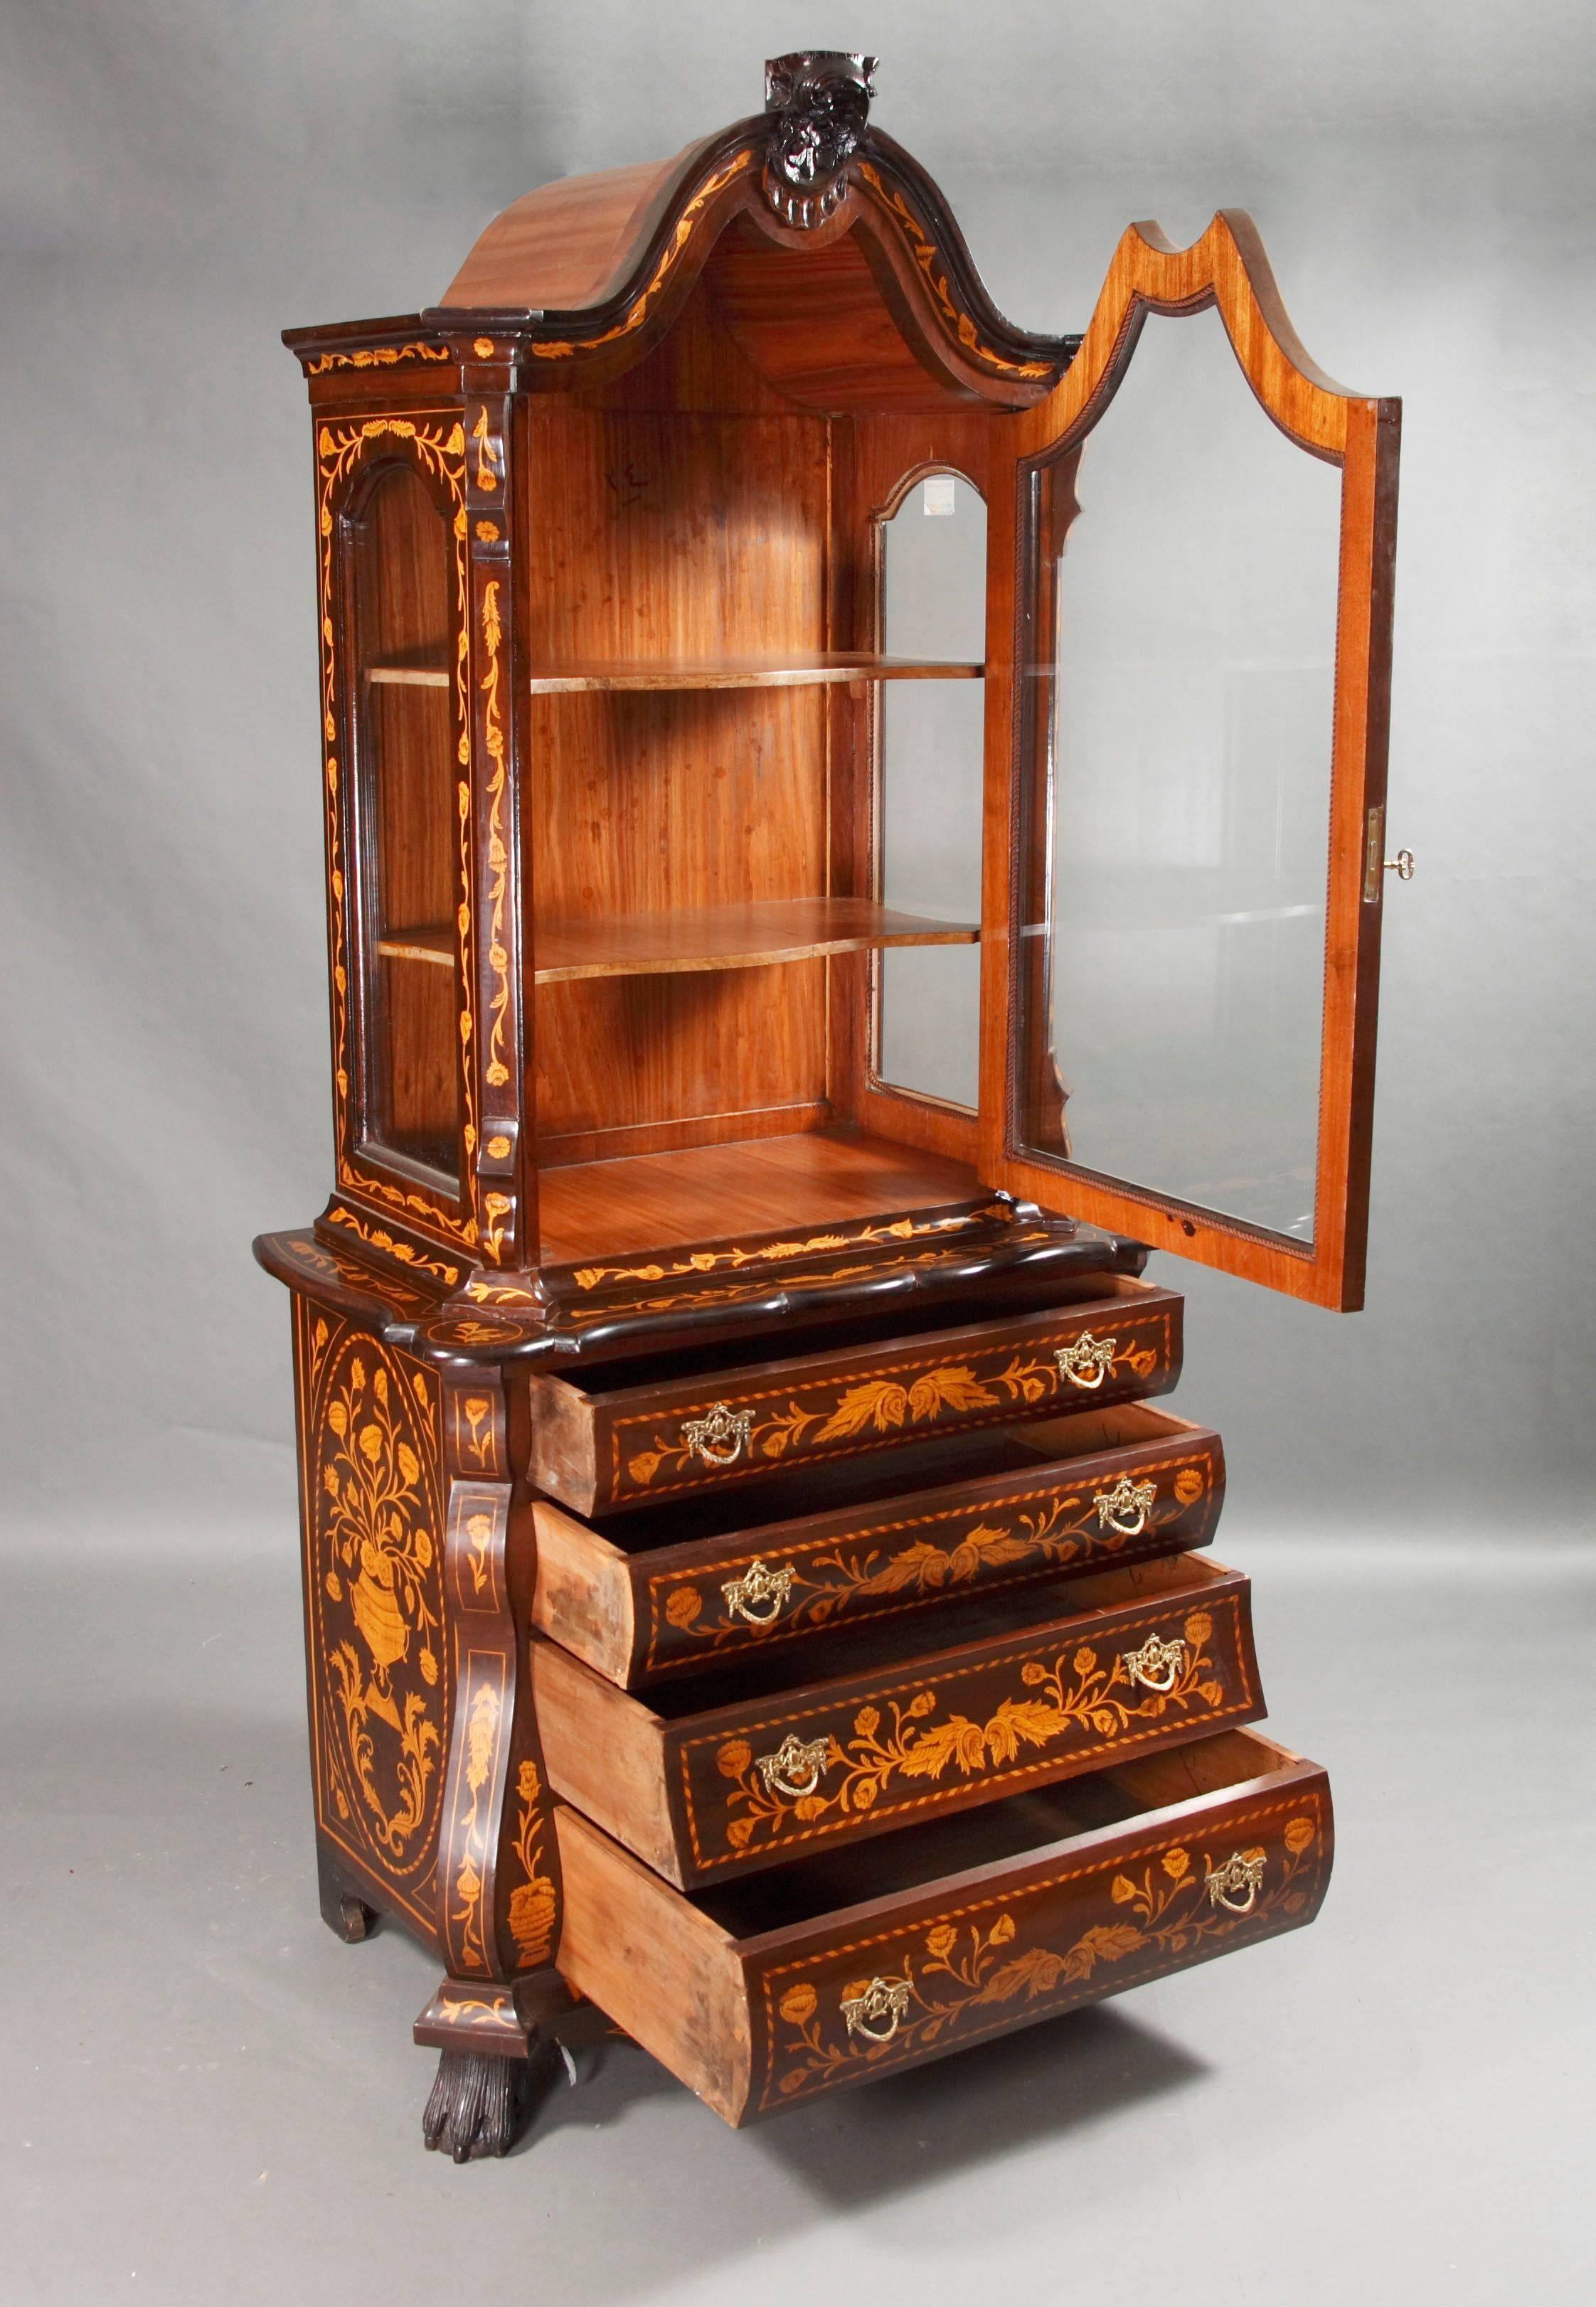 Display cabinet in Dutch Baroque style
Light mahogany and maple on solid wood. Exceptionally rich intarsia. Work on carved paw-feet. Multiple curved border above bowed four-drawered body, framed with prominent corner-pilaster strips. Multiple